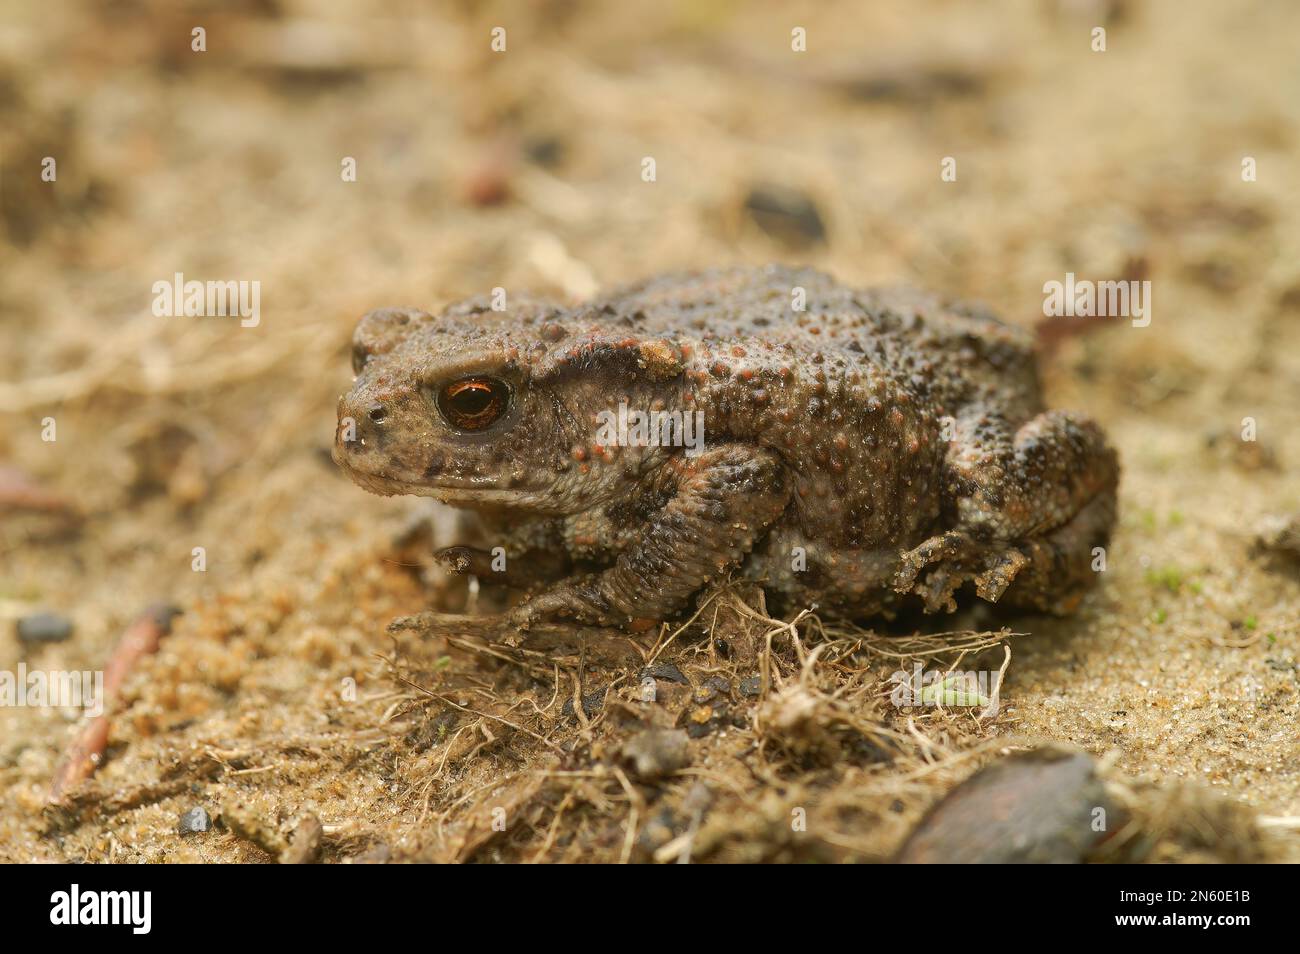 Natural closeup on the Common European toad, Bufo bufo, sitting on the ground Stock Photo